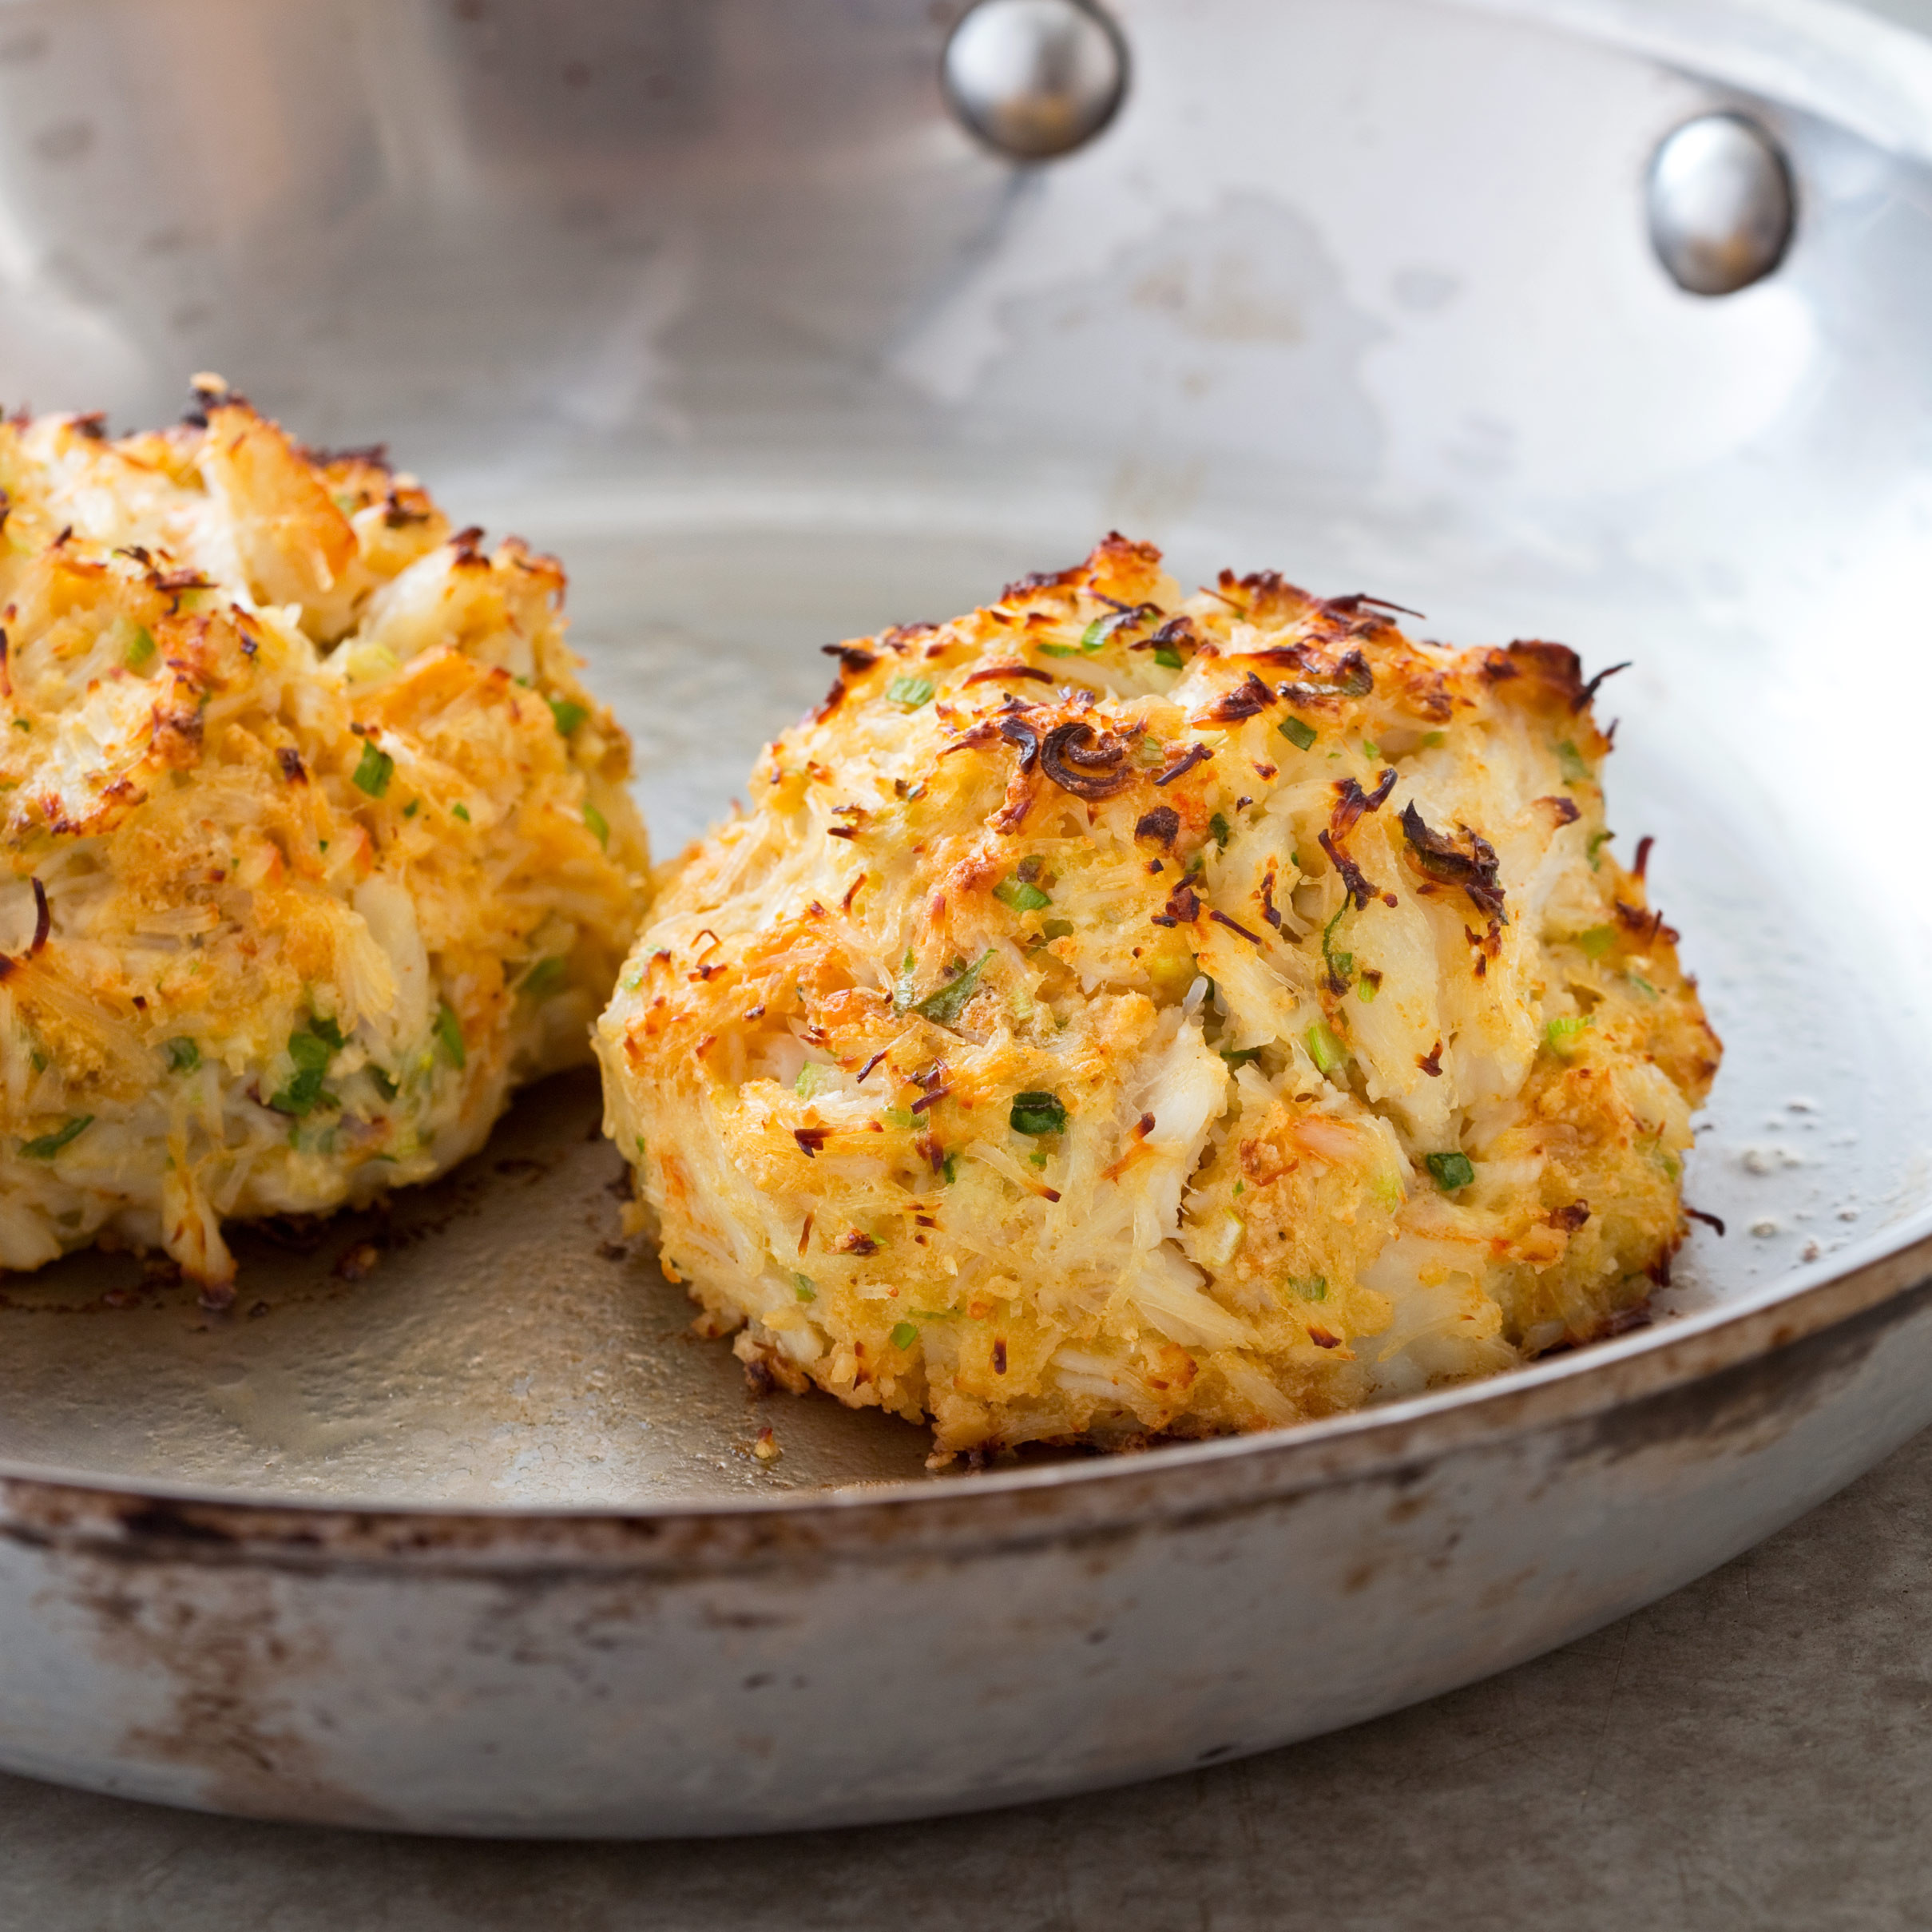 Old Bay Crab Cake Recipe
 Maryland Crab Cakes—Pan Fried Crab Cakes with Old Bay